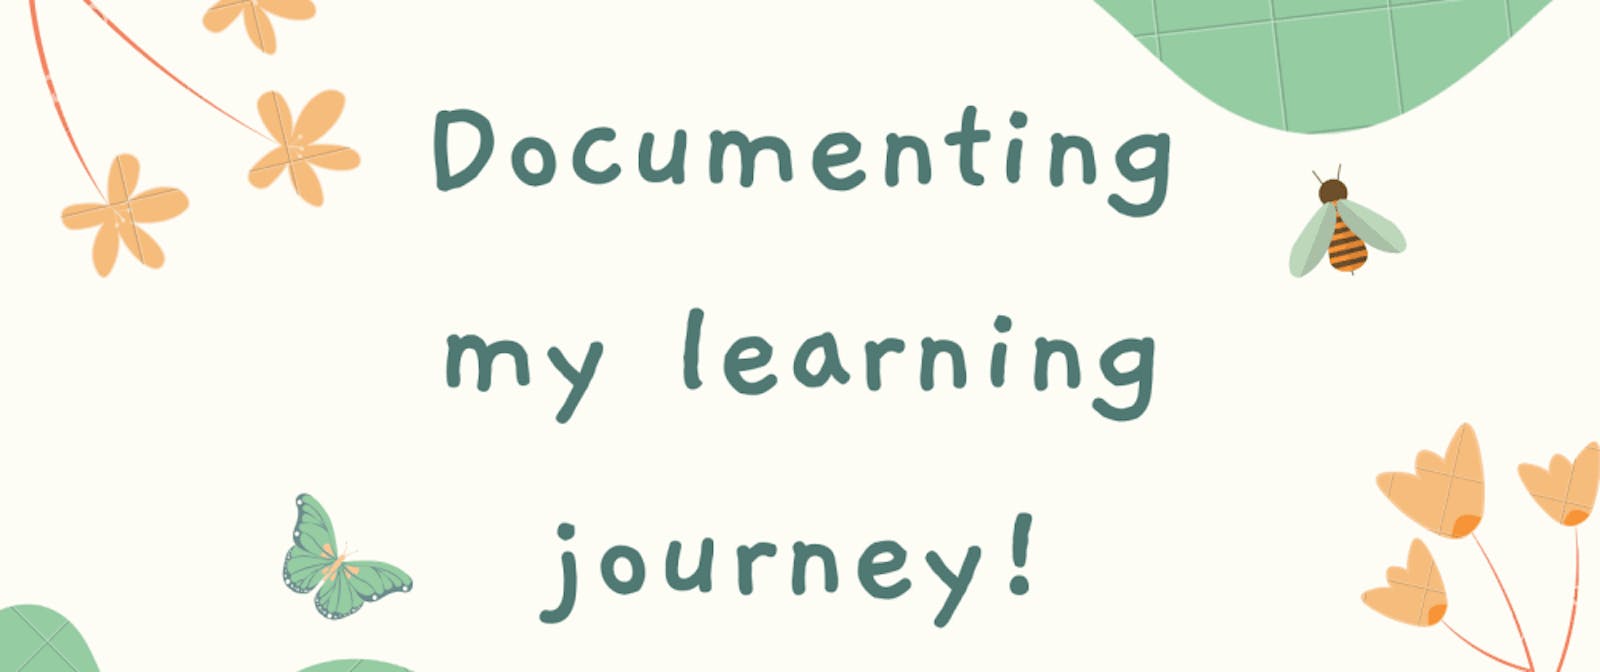 Documenting My Learning Journey